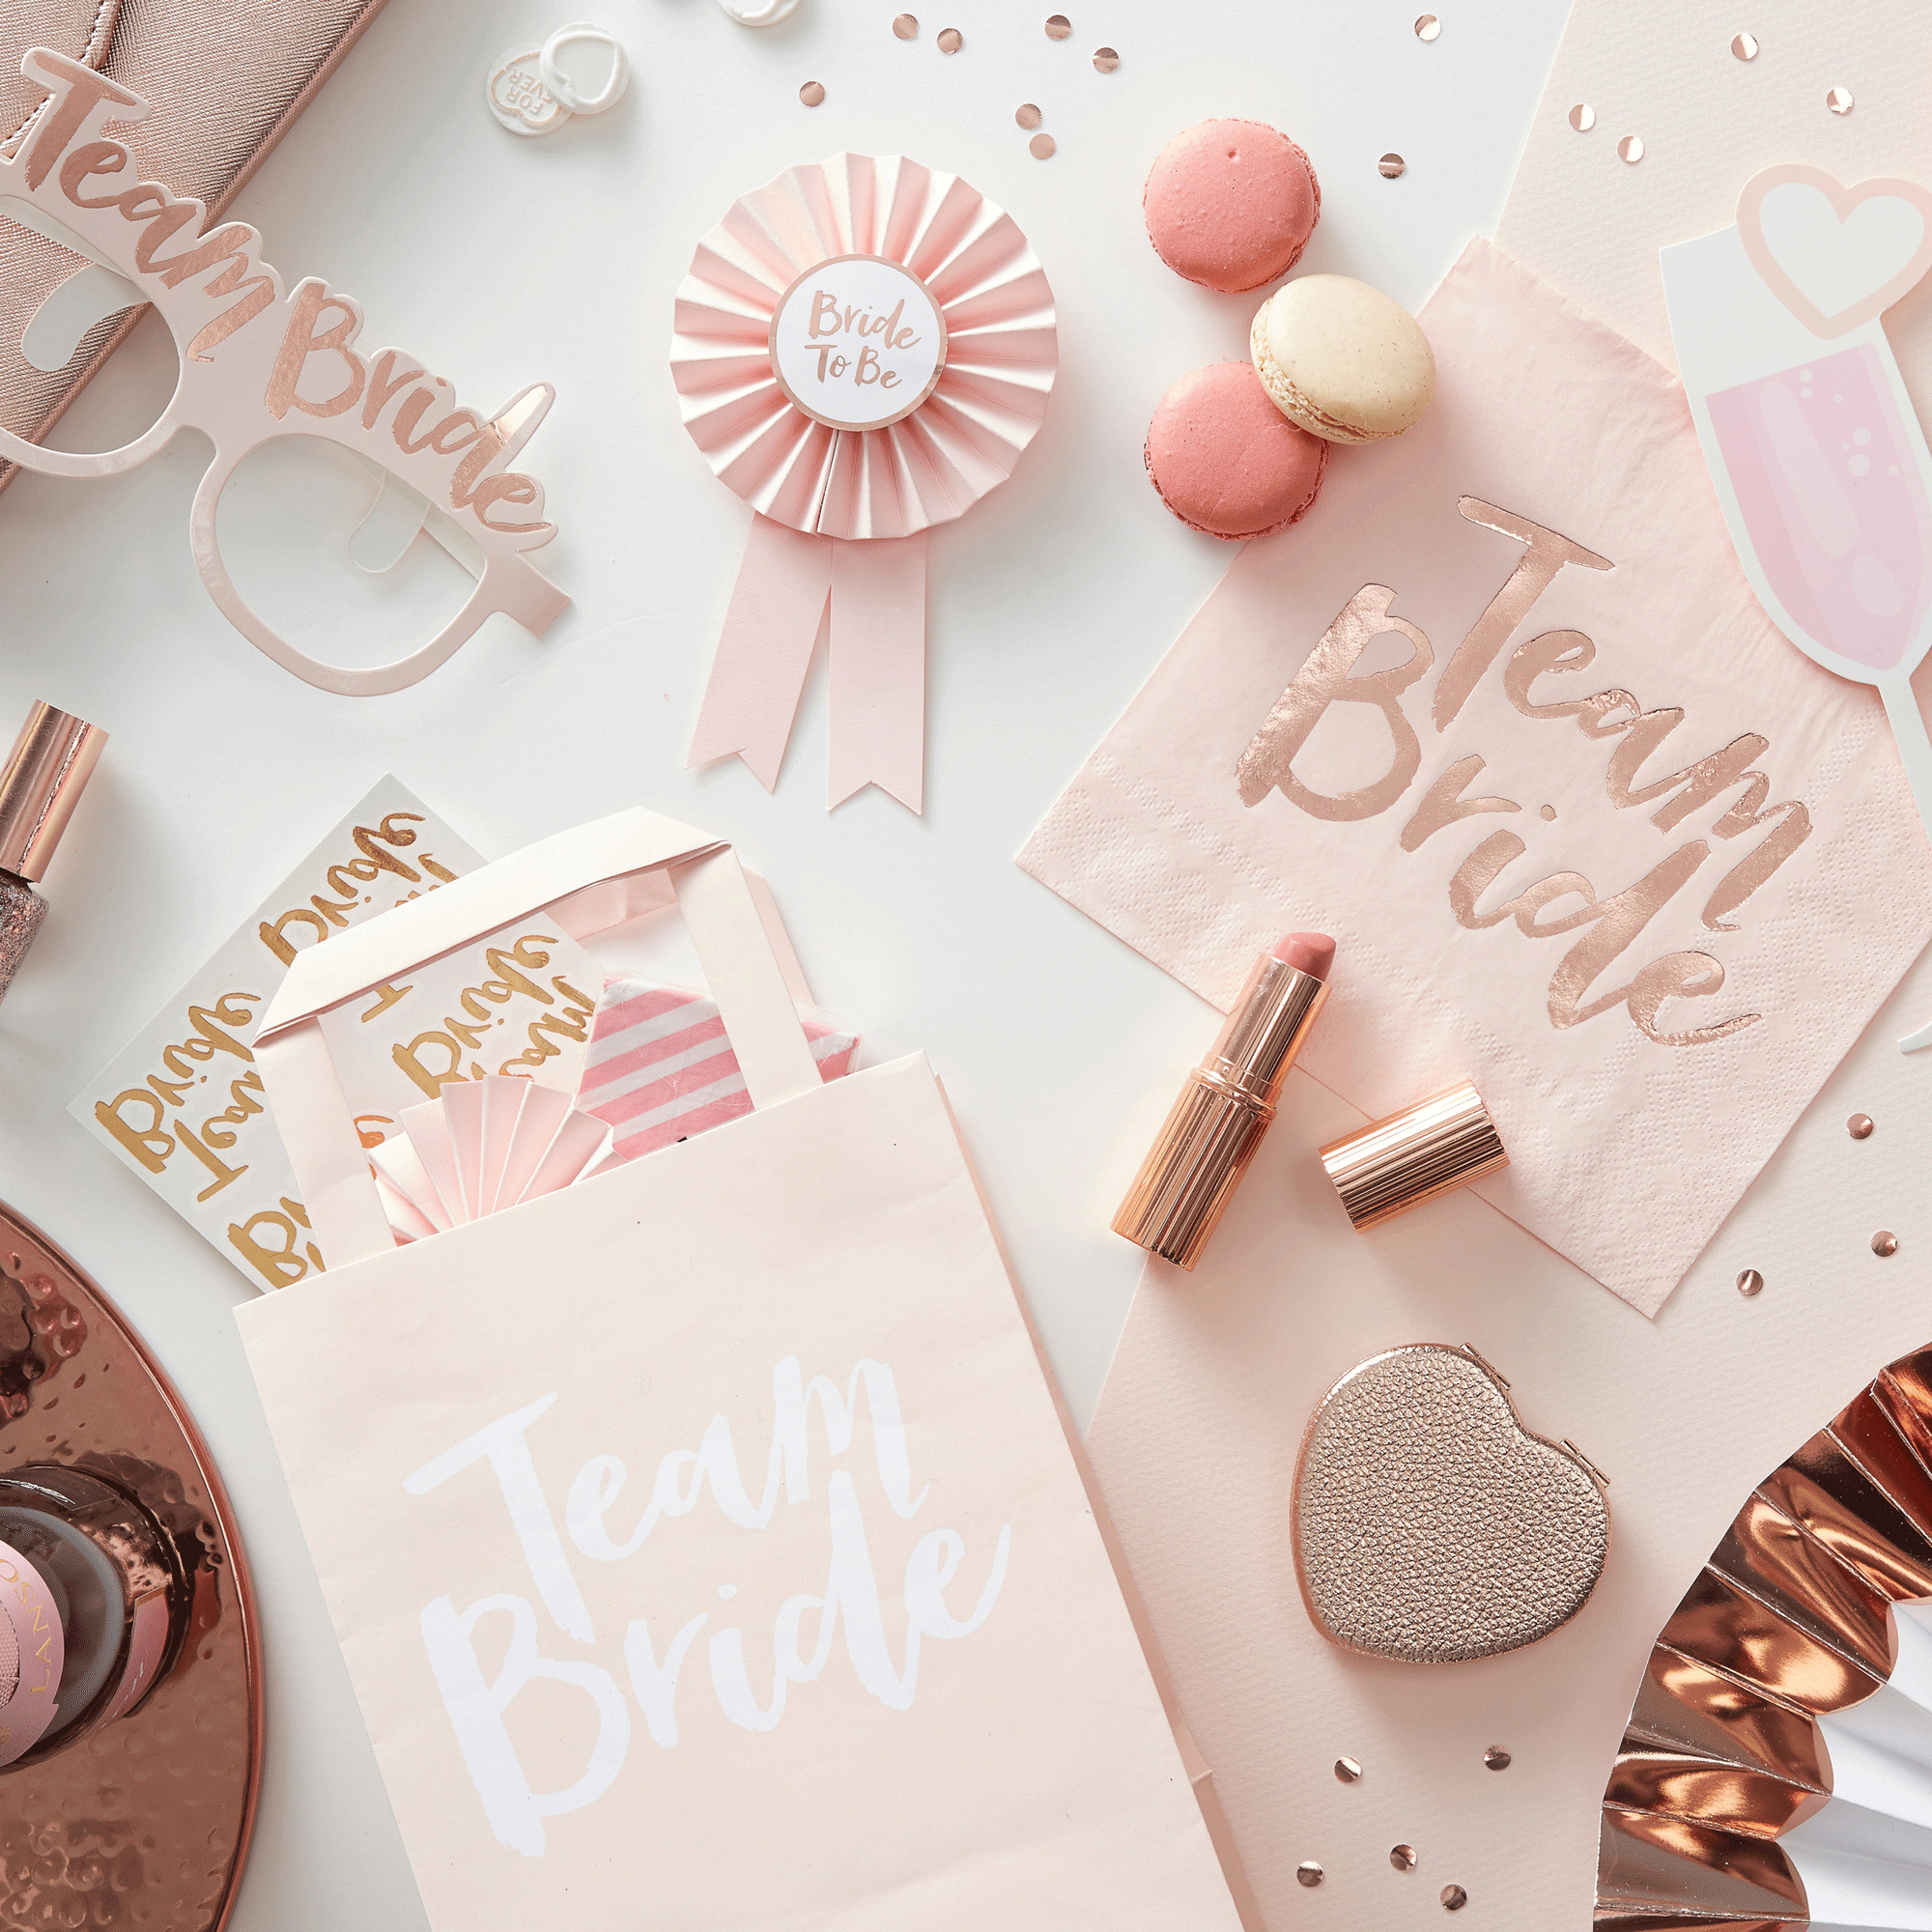 Team Bride Pink and Rose Gold Bride-to-be Sash